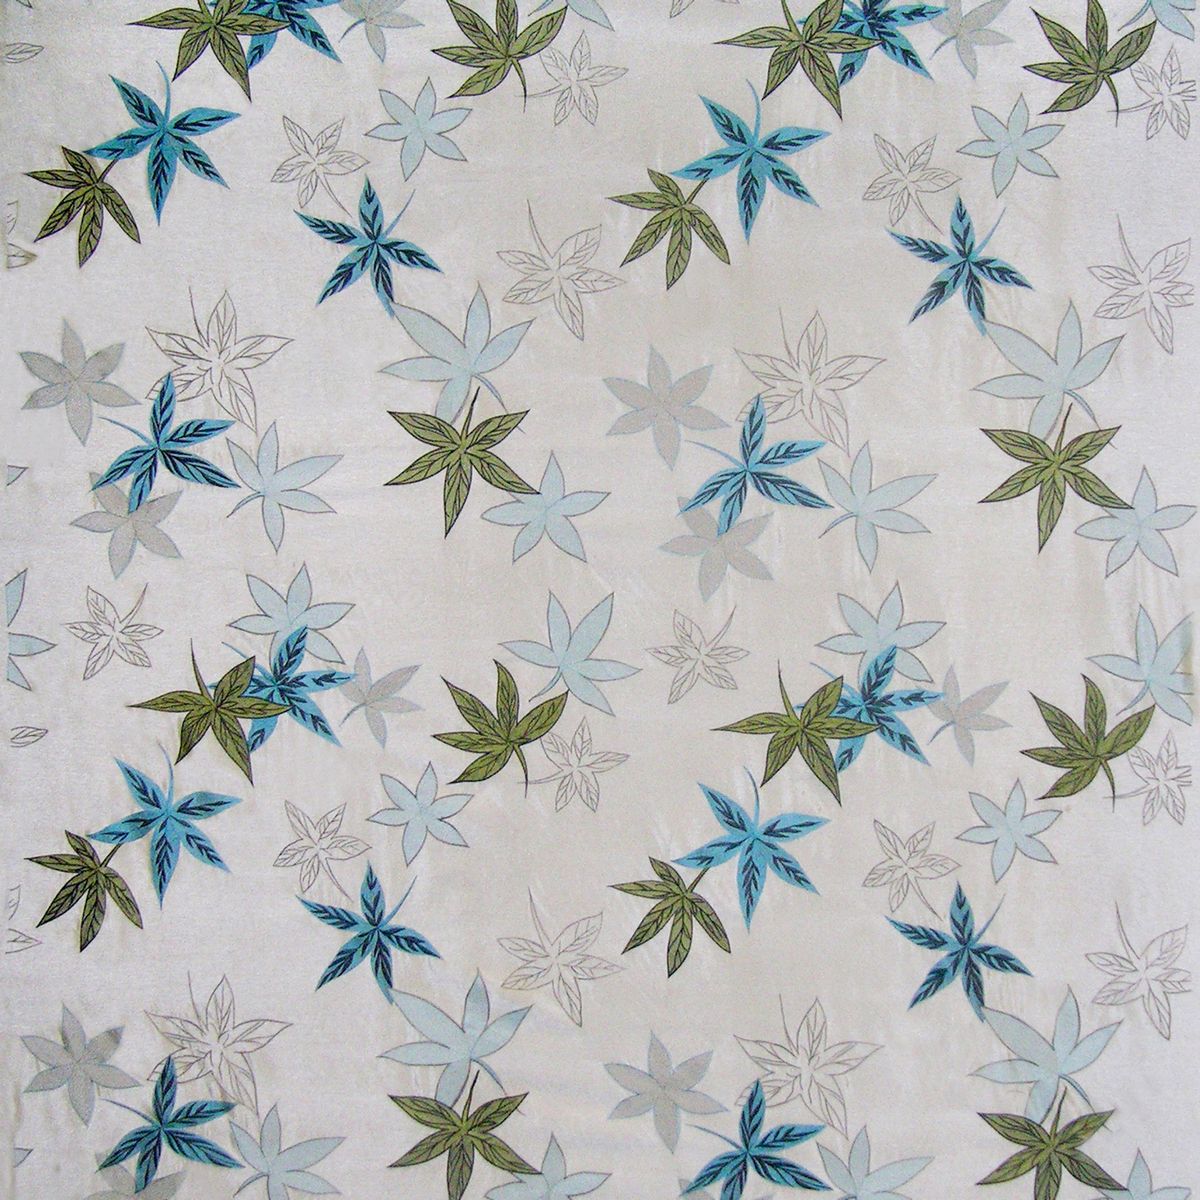 Navedano Duck Egg Fabric by Voyage Maison